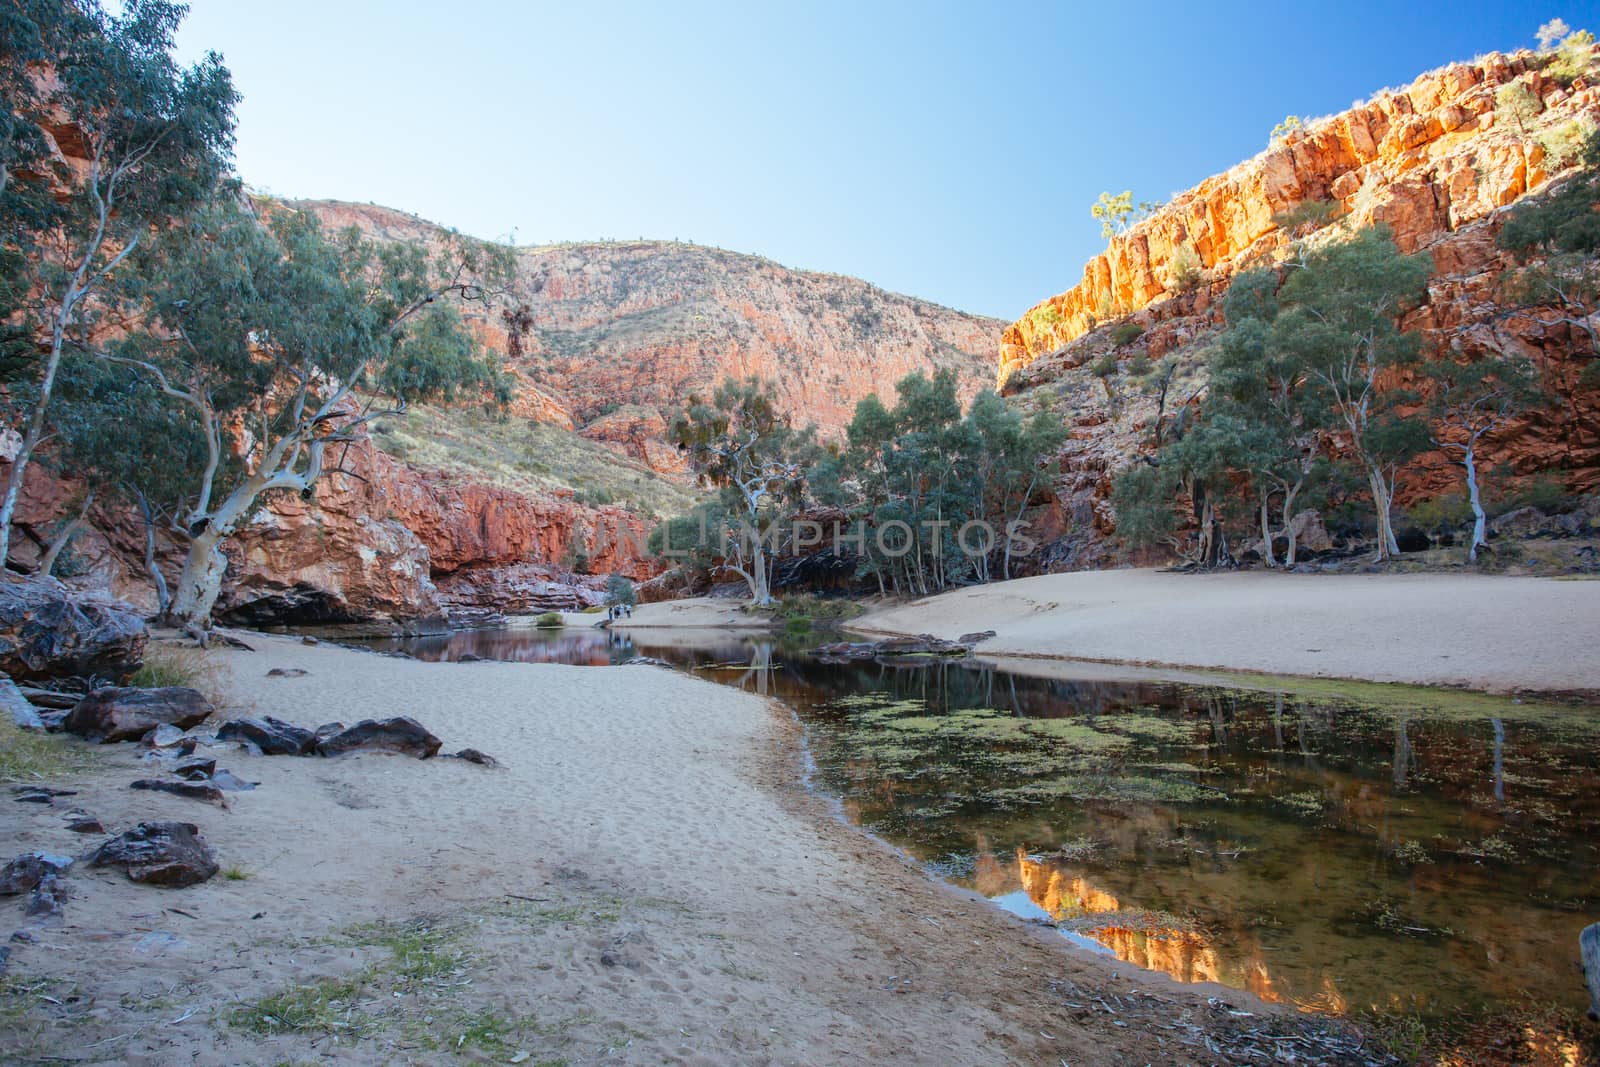 The impressive views of Ormiston Gorge in the West MacDonnell Ranges in Northern Territory, Australia